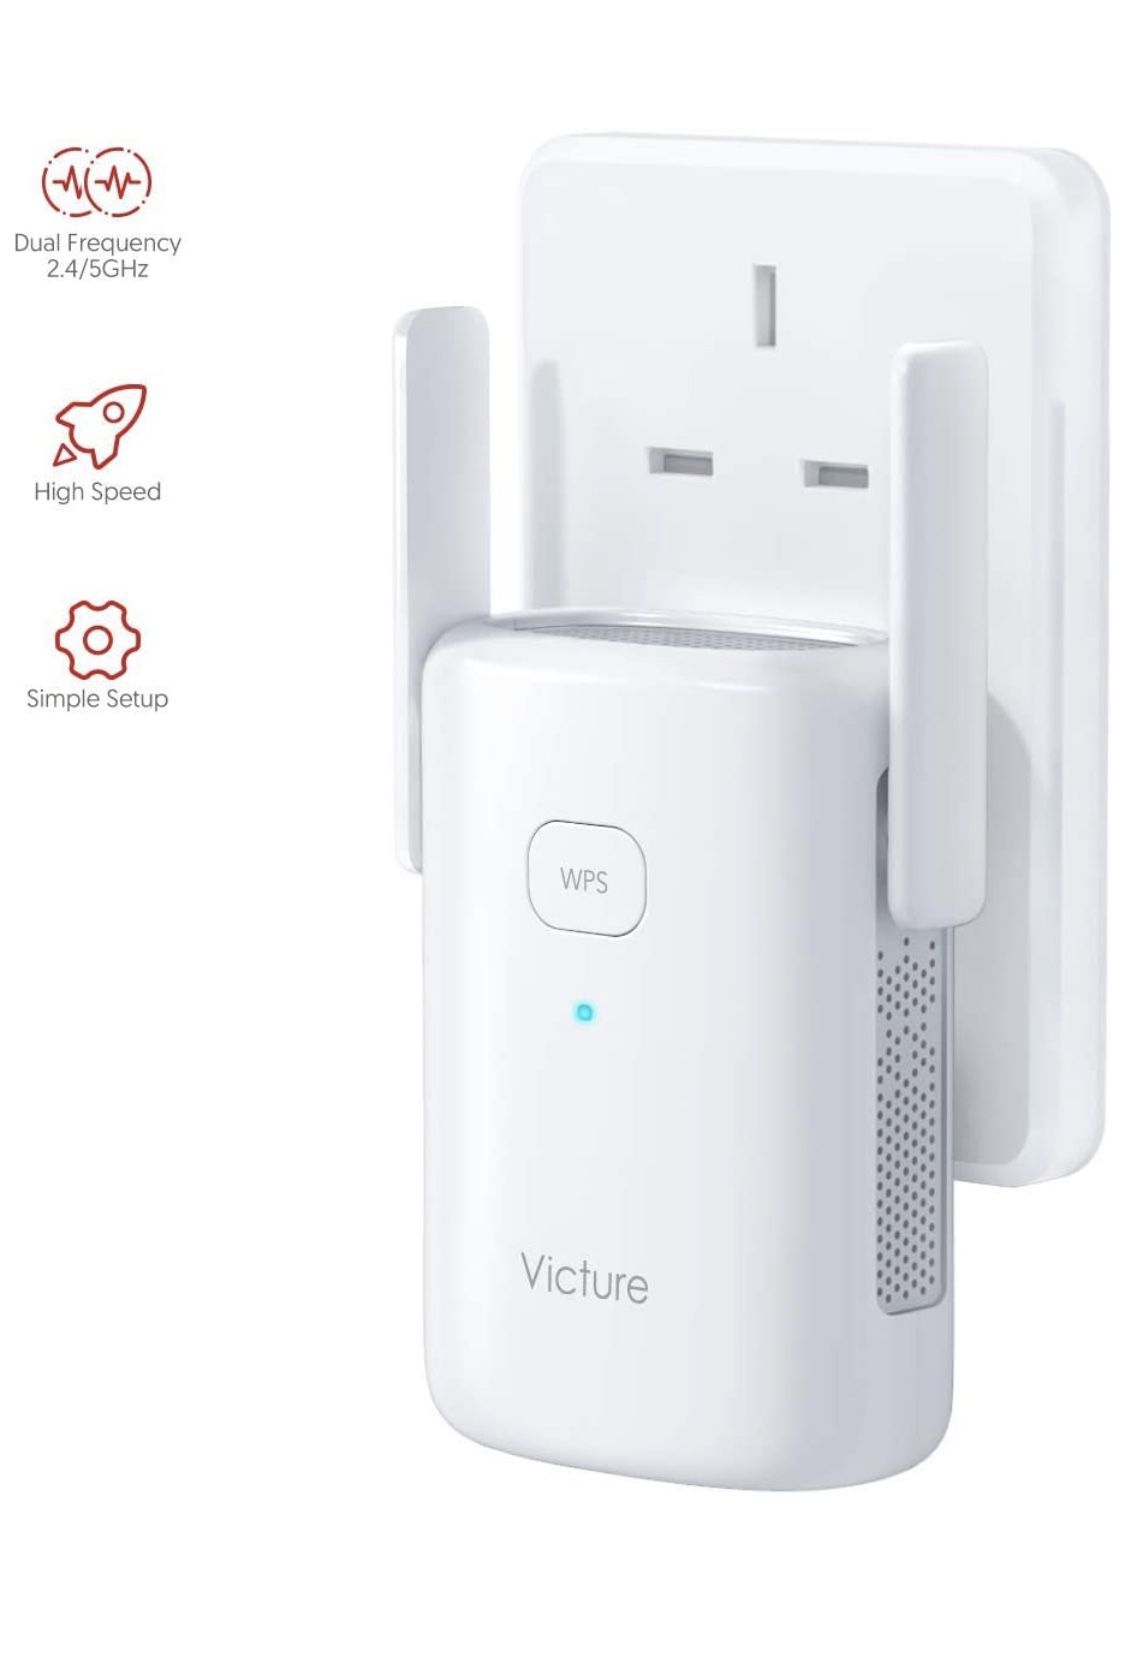 Victure 1200mbps WiFi Range Extender, 2.4G&5G Dual Band WiFi Repeater, WiFi Booster with Ethernet Port,WPS,Simple Setup, to Provide a Stable Network